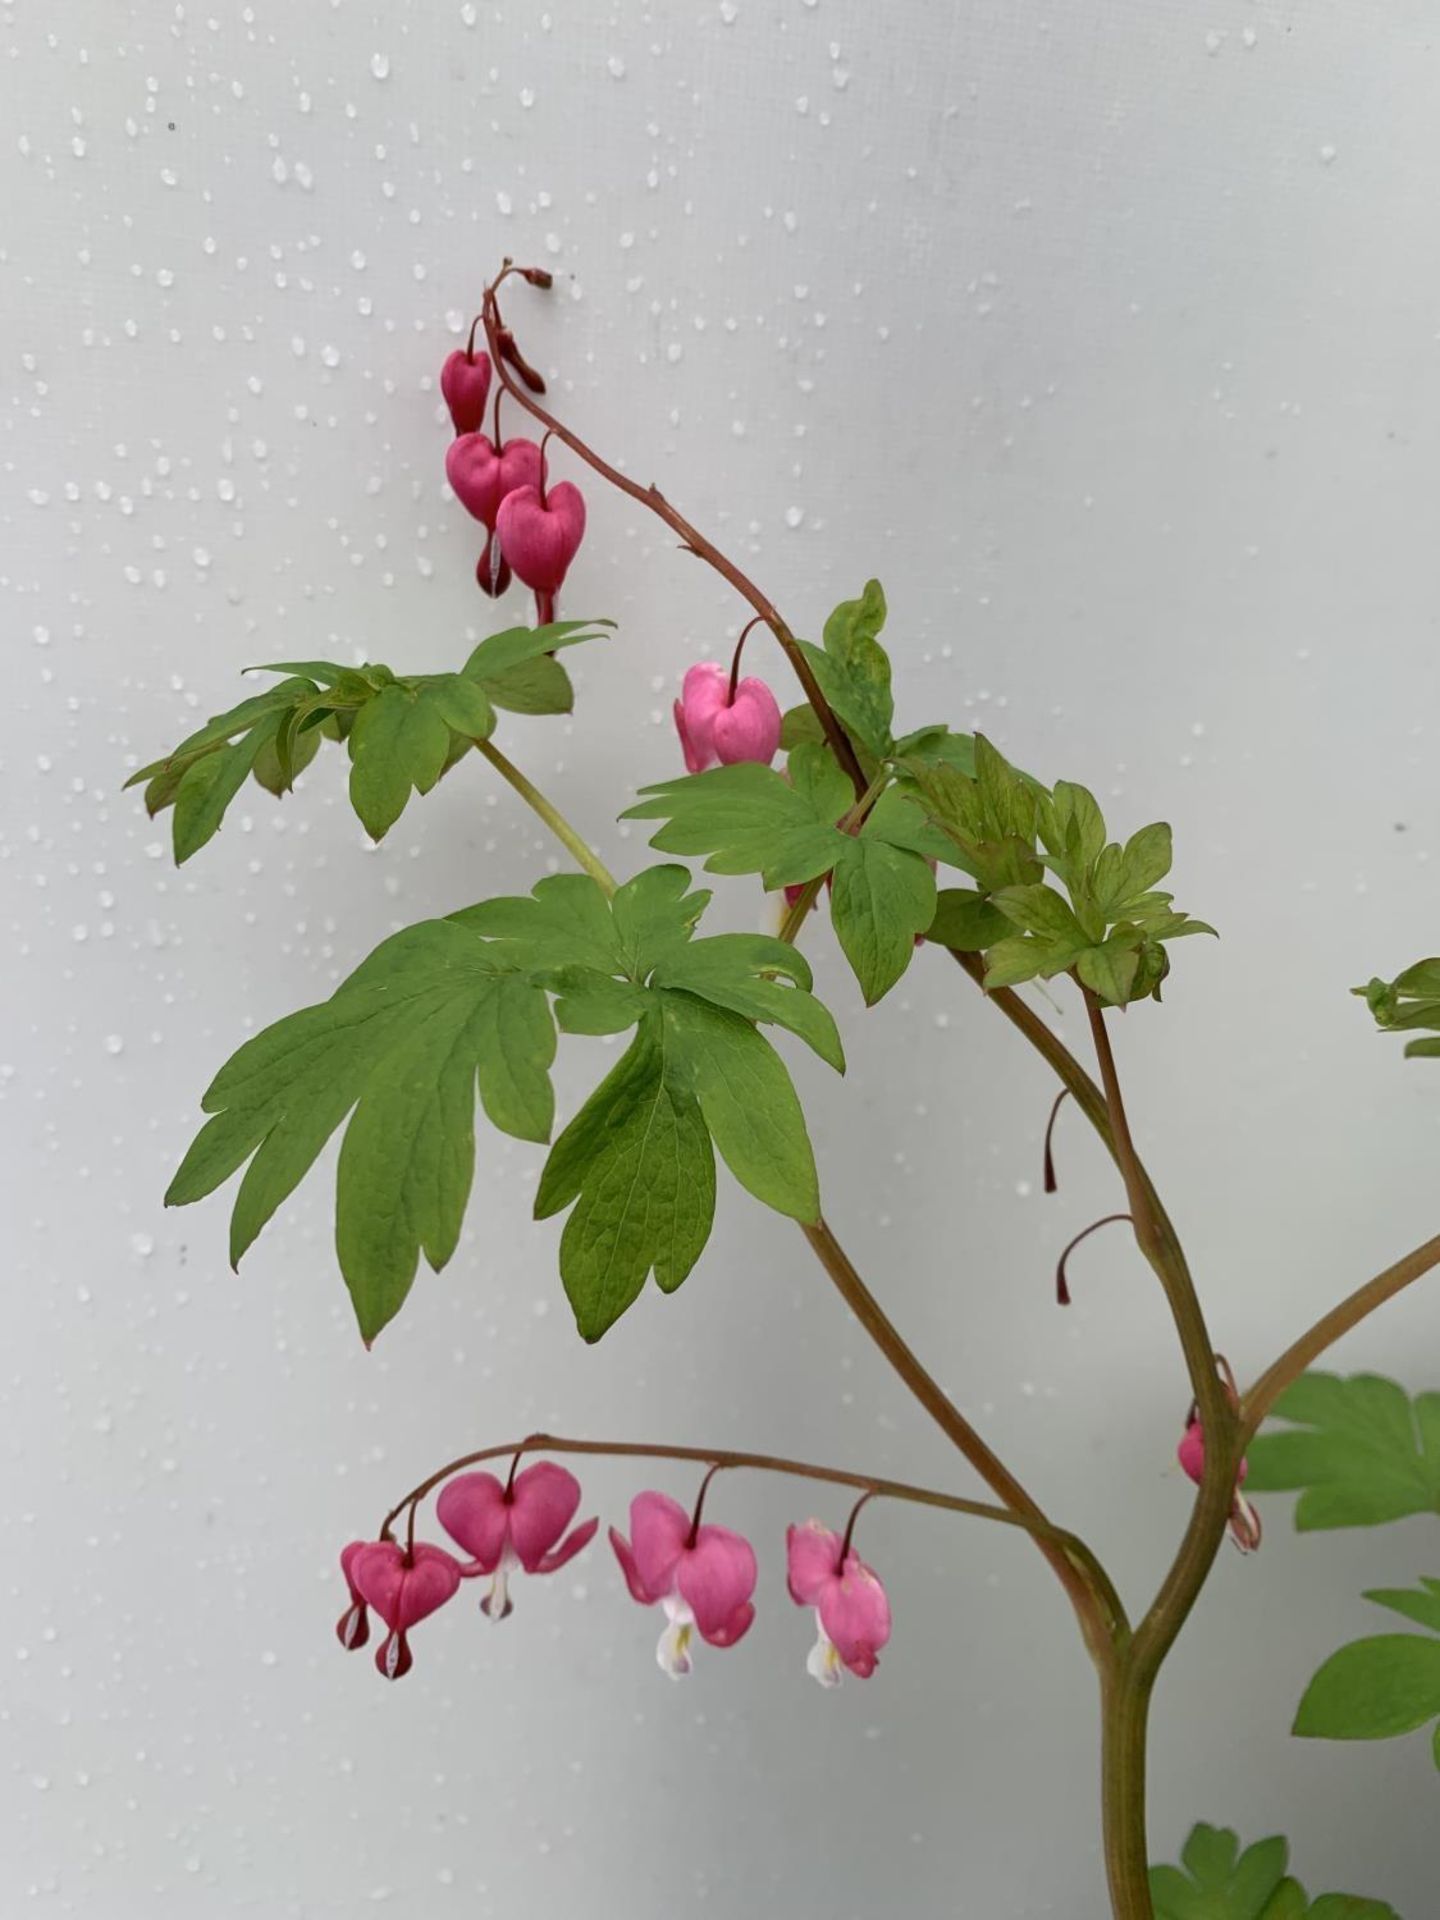 SIX DICENTRA SPECTABILIS BLEEDING HEART 50CM TALL IN 2 LTR POTS TO BE SOLD FOR THE SIX PLUS VAT - Image 6 of 11